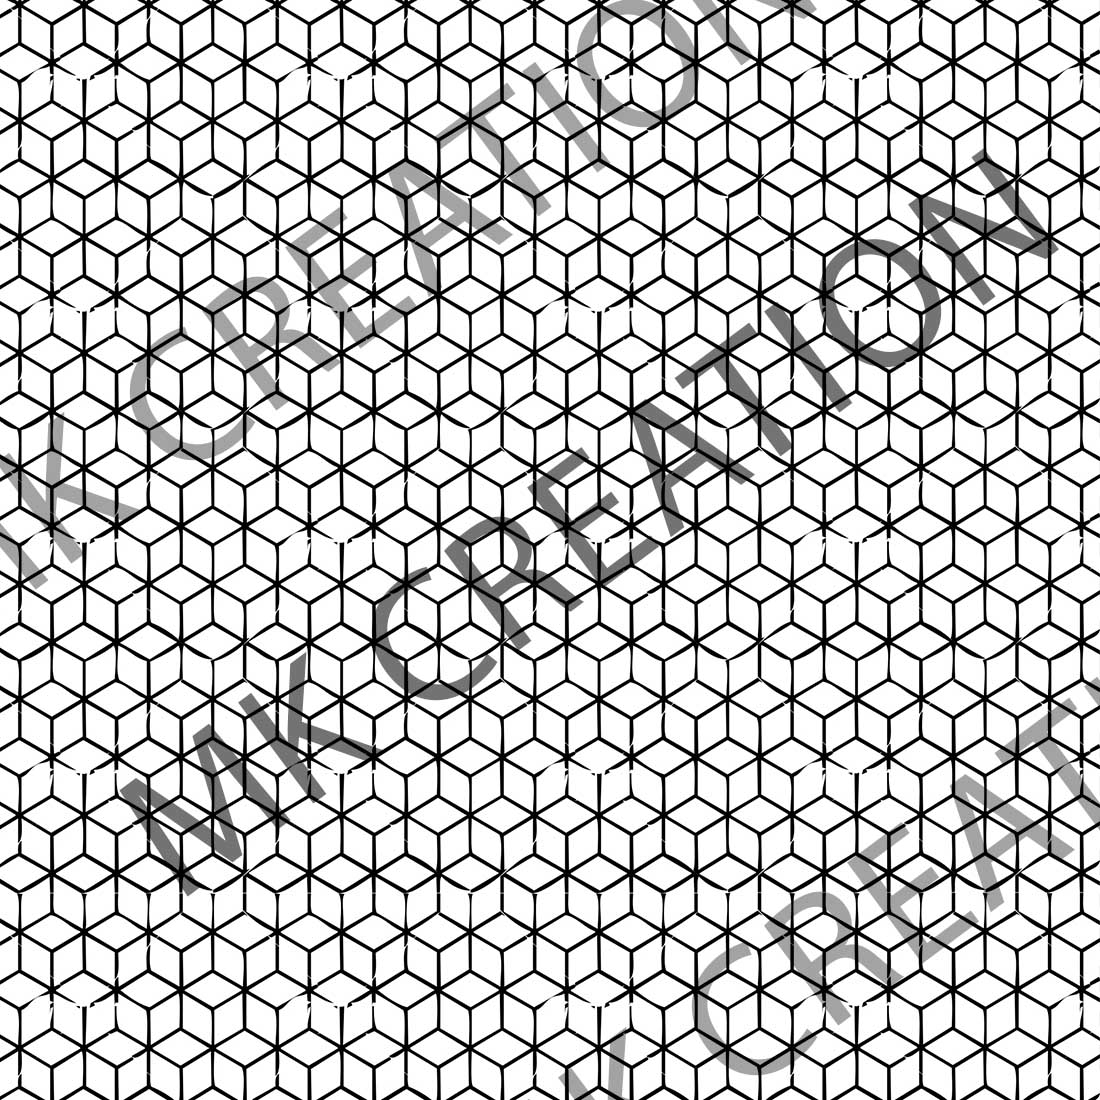 Black and white image of a pattern.